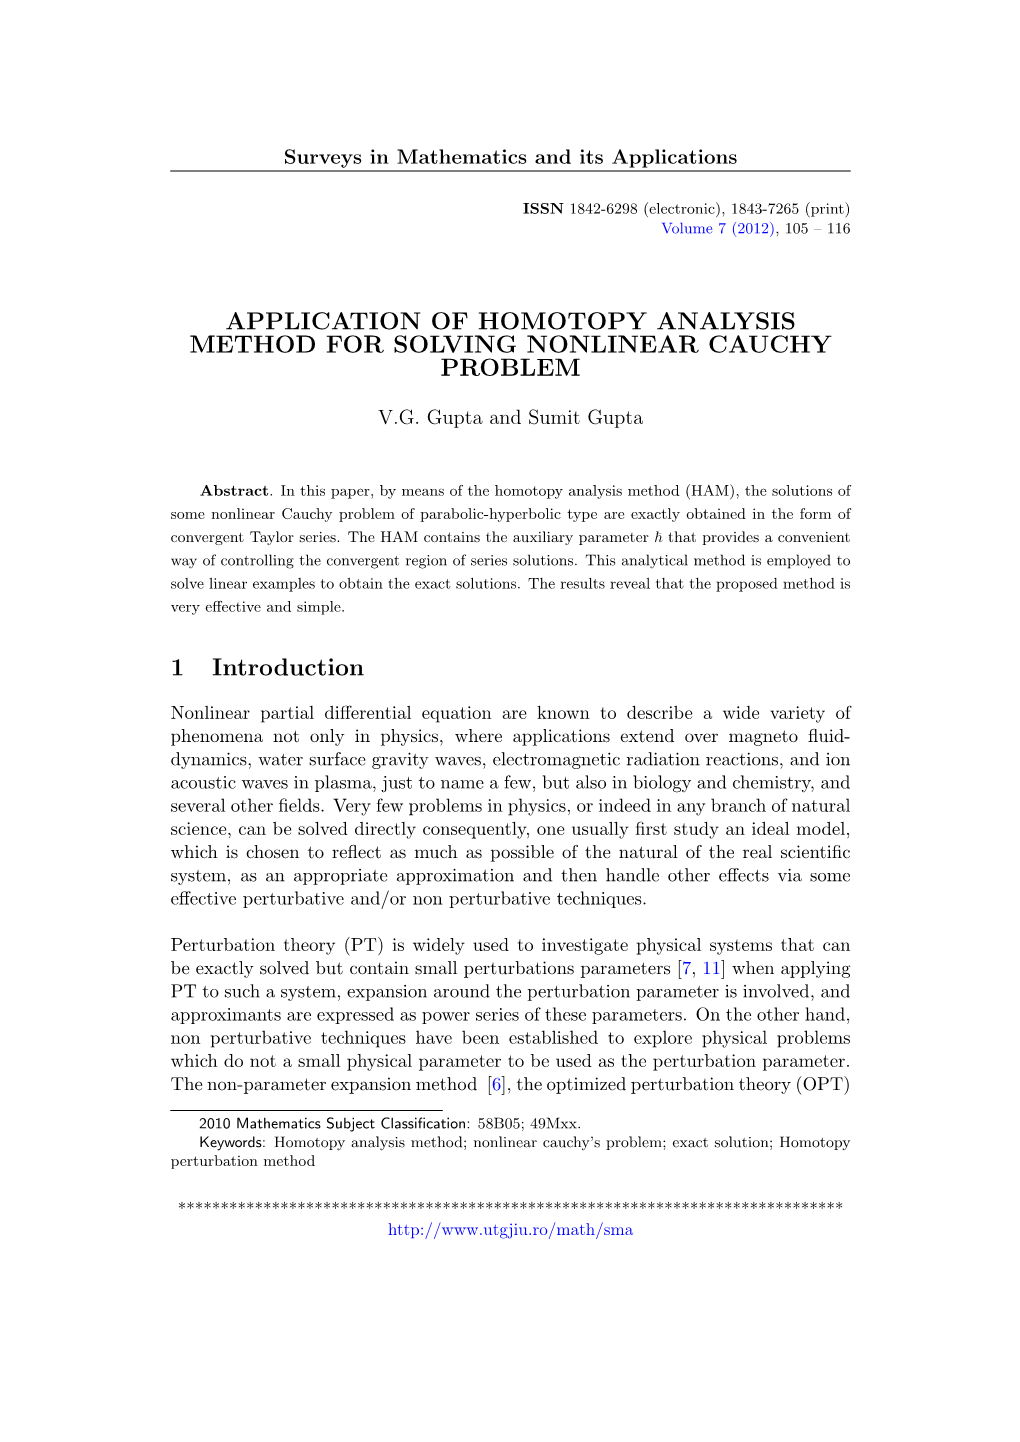 Application of Homotopy Analysis Method for Solving Nonlinear Cauchy Problem